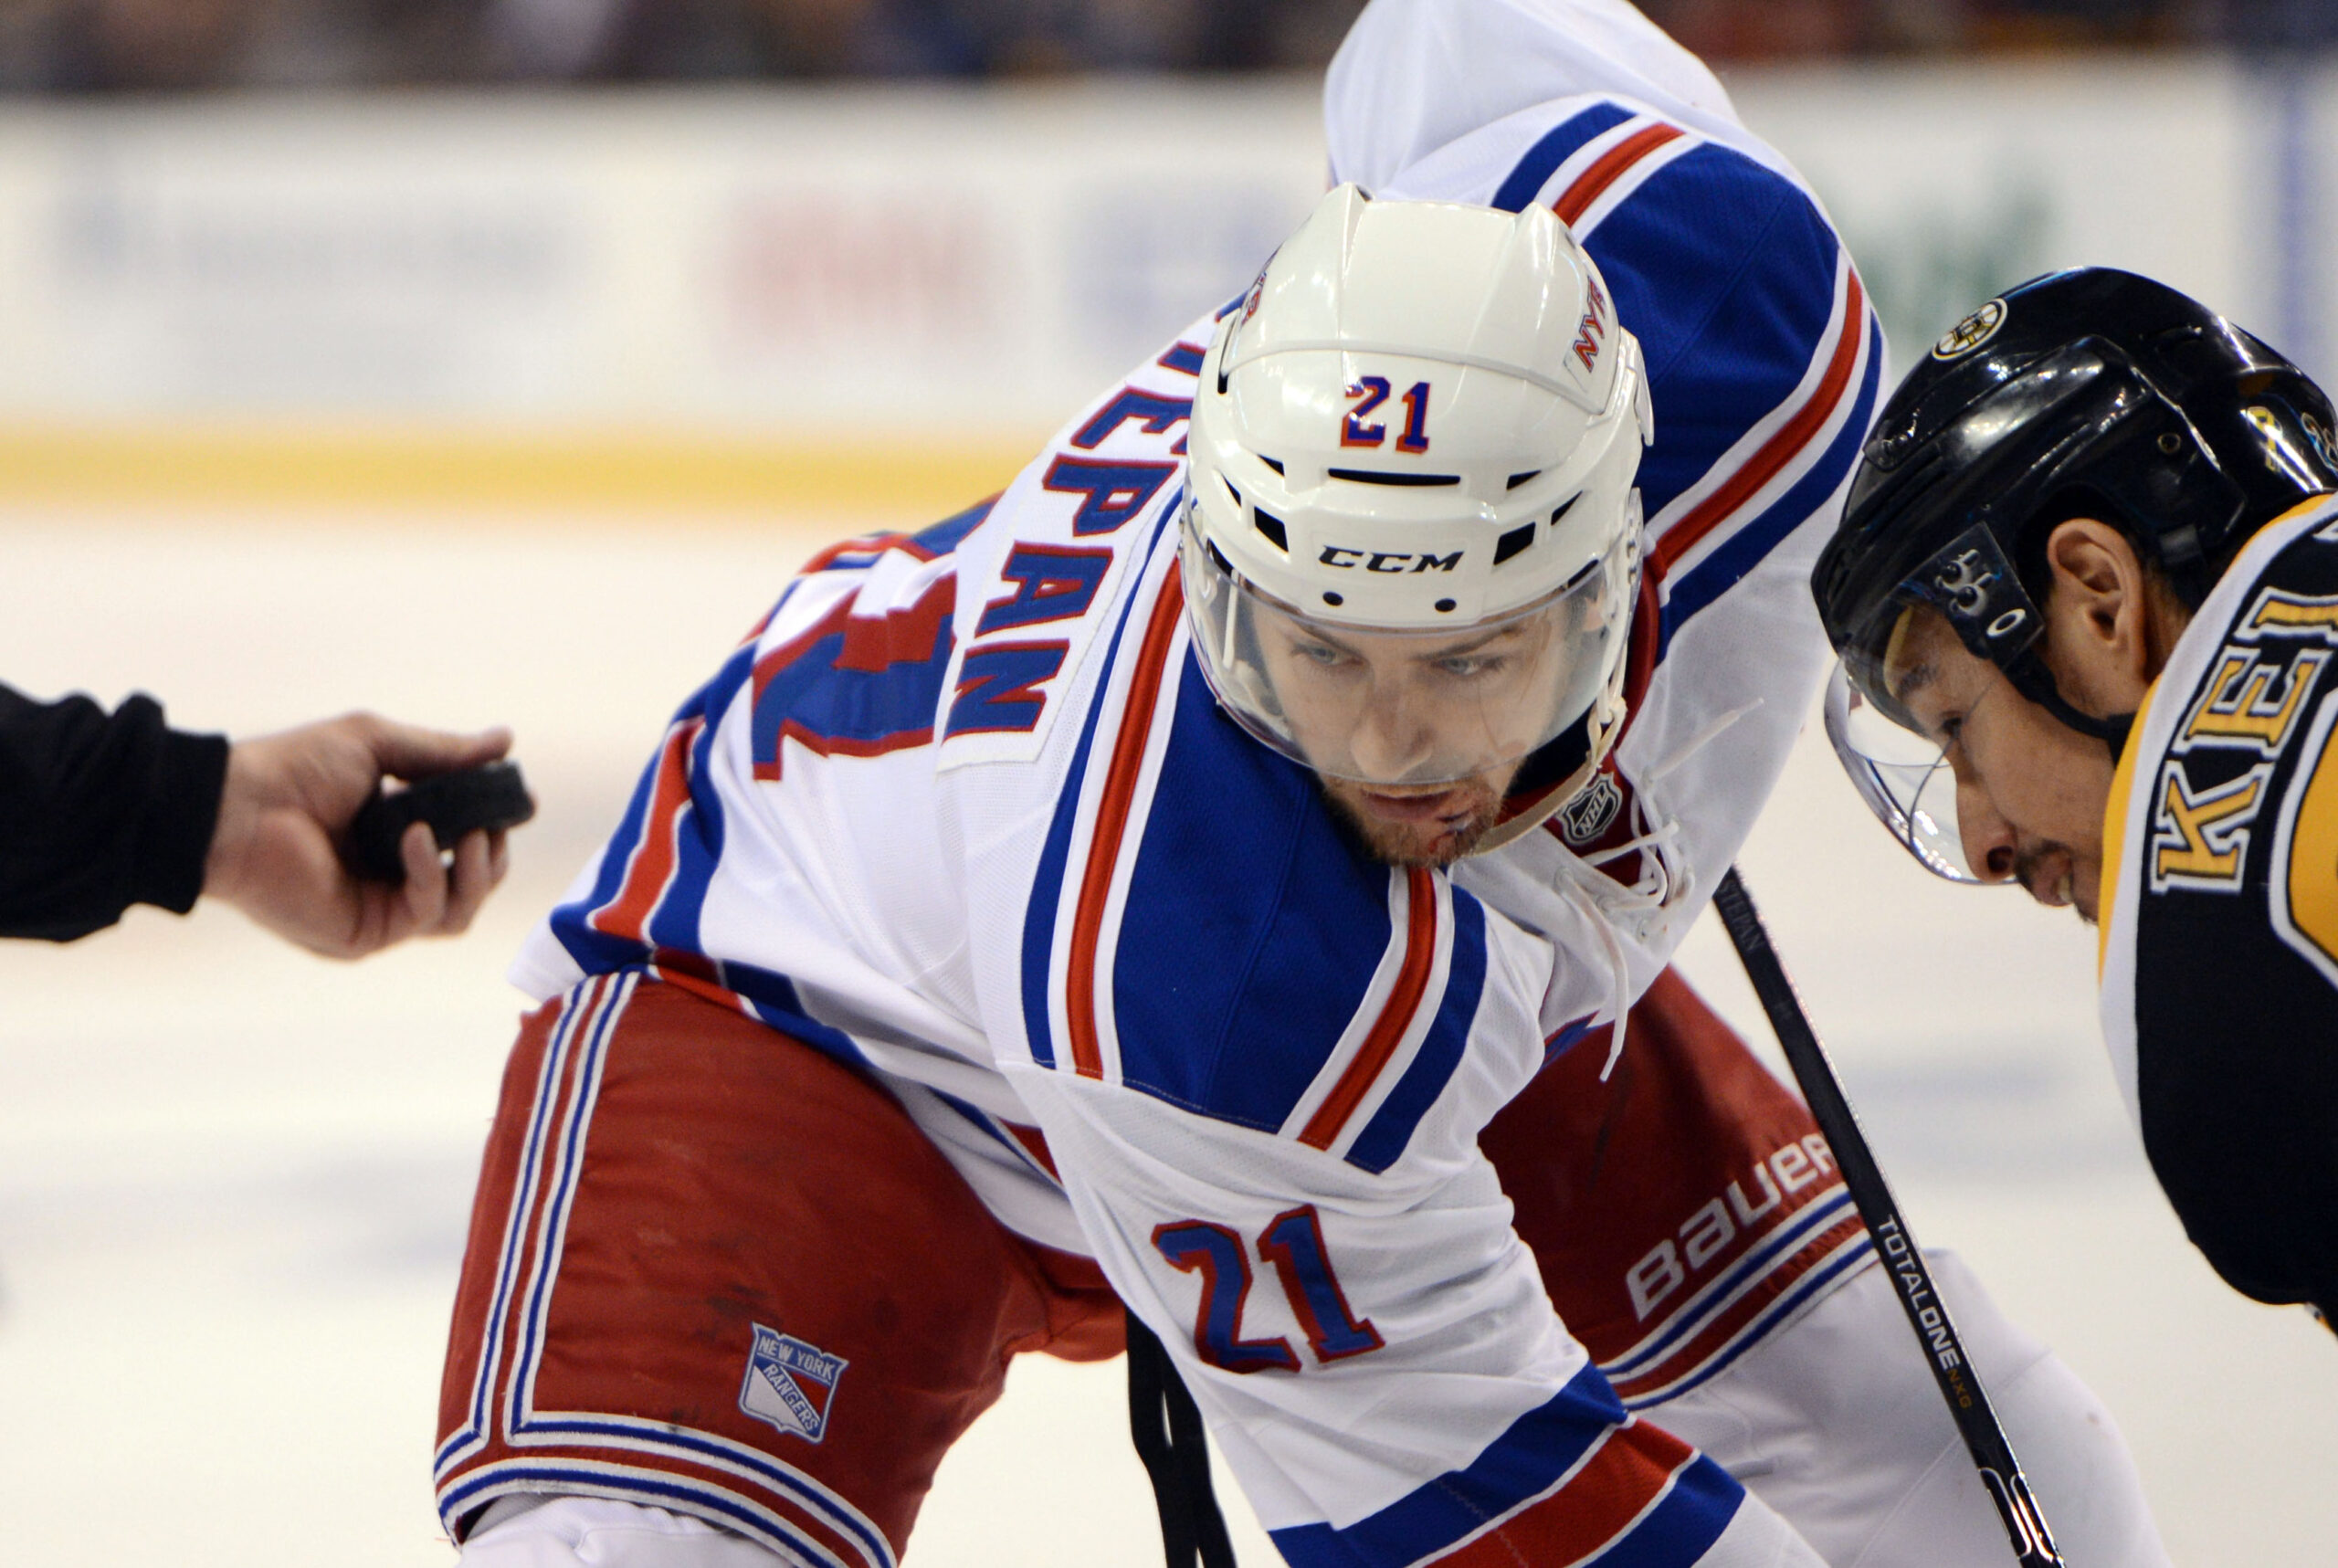 Derek Stepan retires from the NHL after 13 seasons - Daily Faceoff